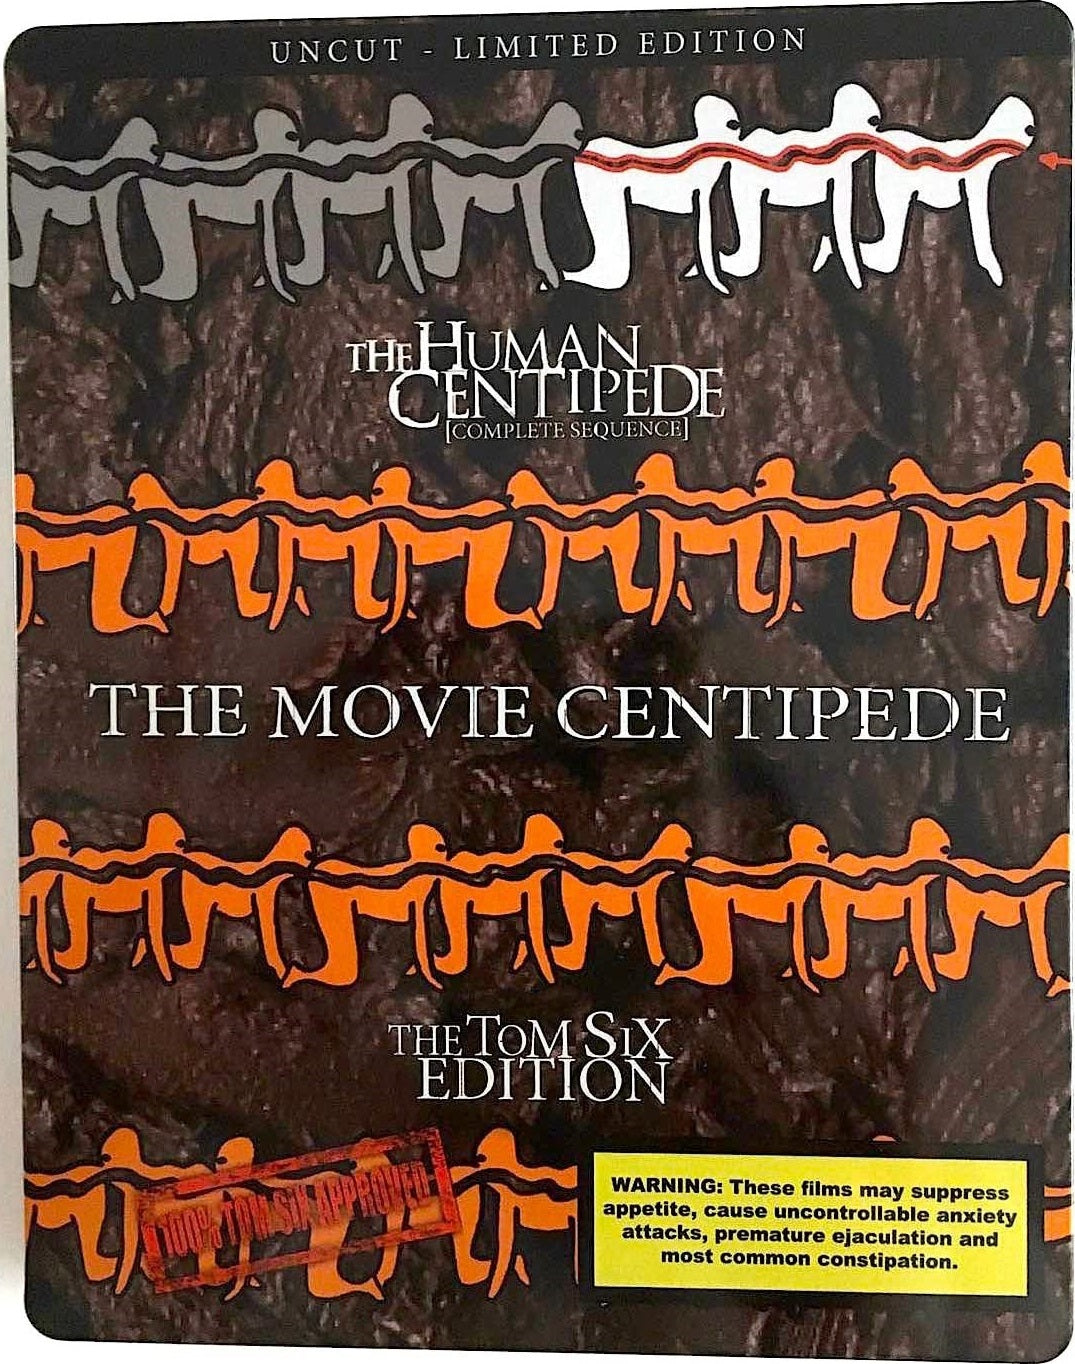 THE HUMAN CENTIPEDE: COMPLETE SEQUENCE (REGION B IMPORT - LIMITED EDITION) BLU-RAY STEELBOOK